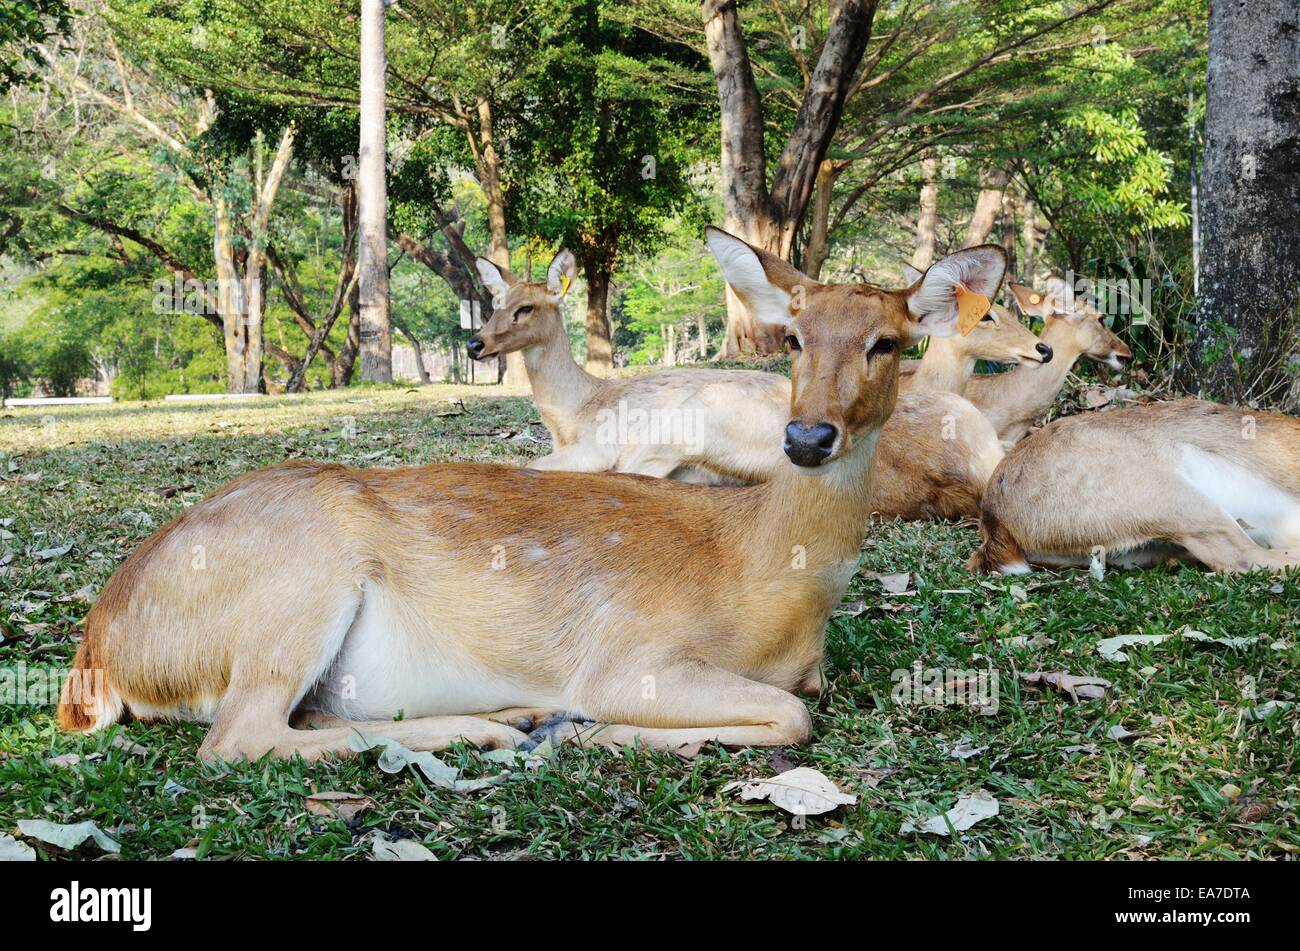 The group of antelope are relaxing on the grass Stock Photo